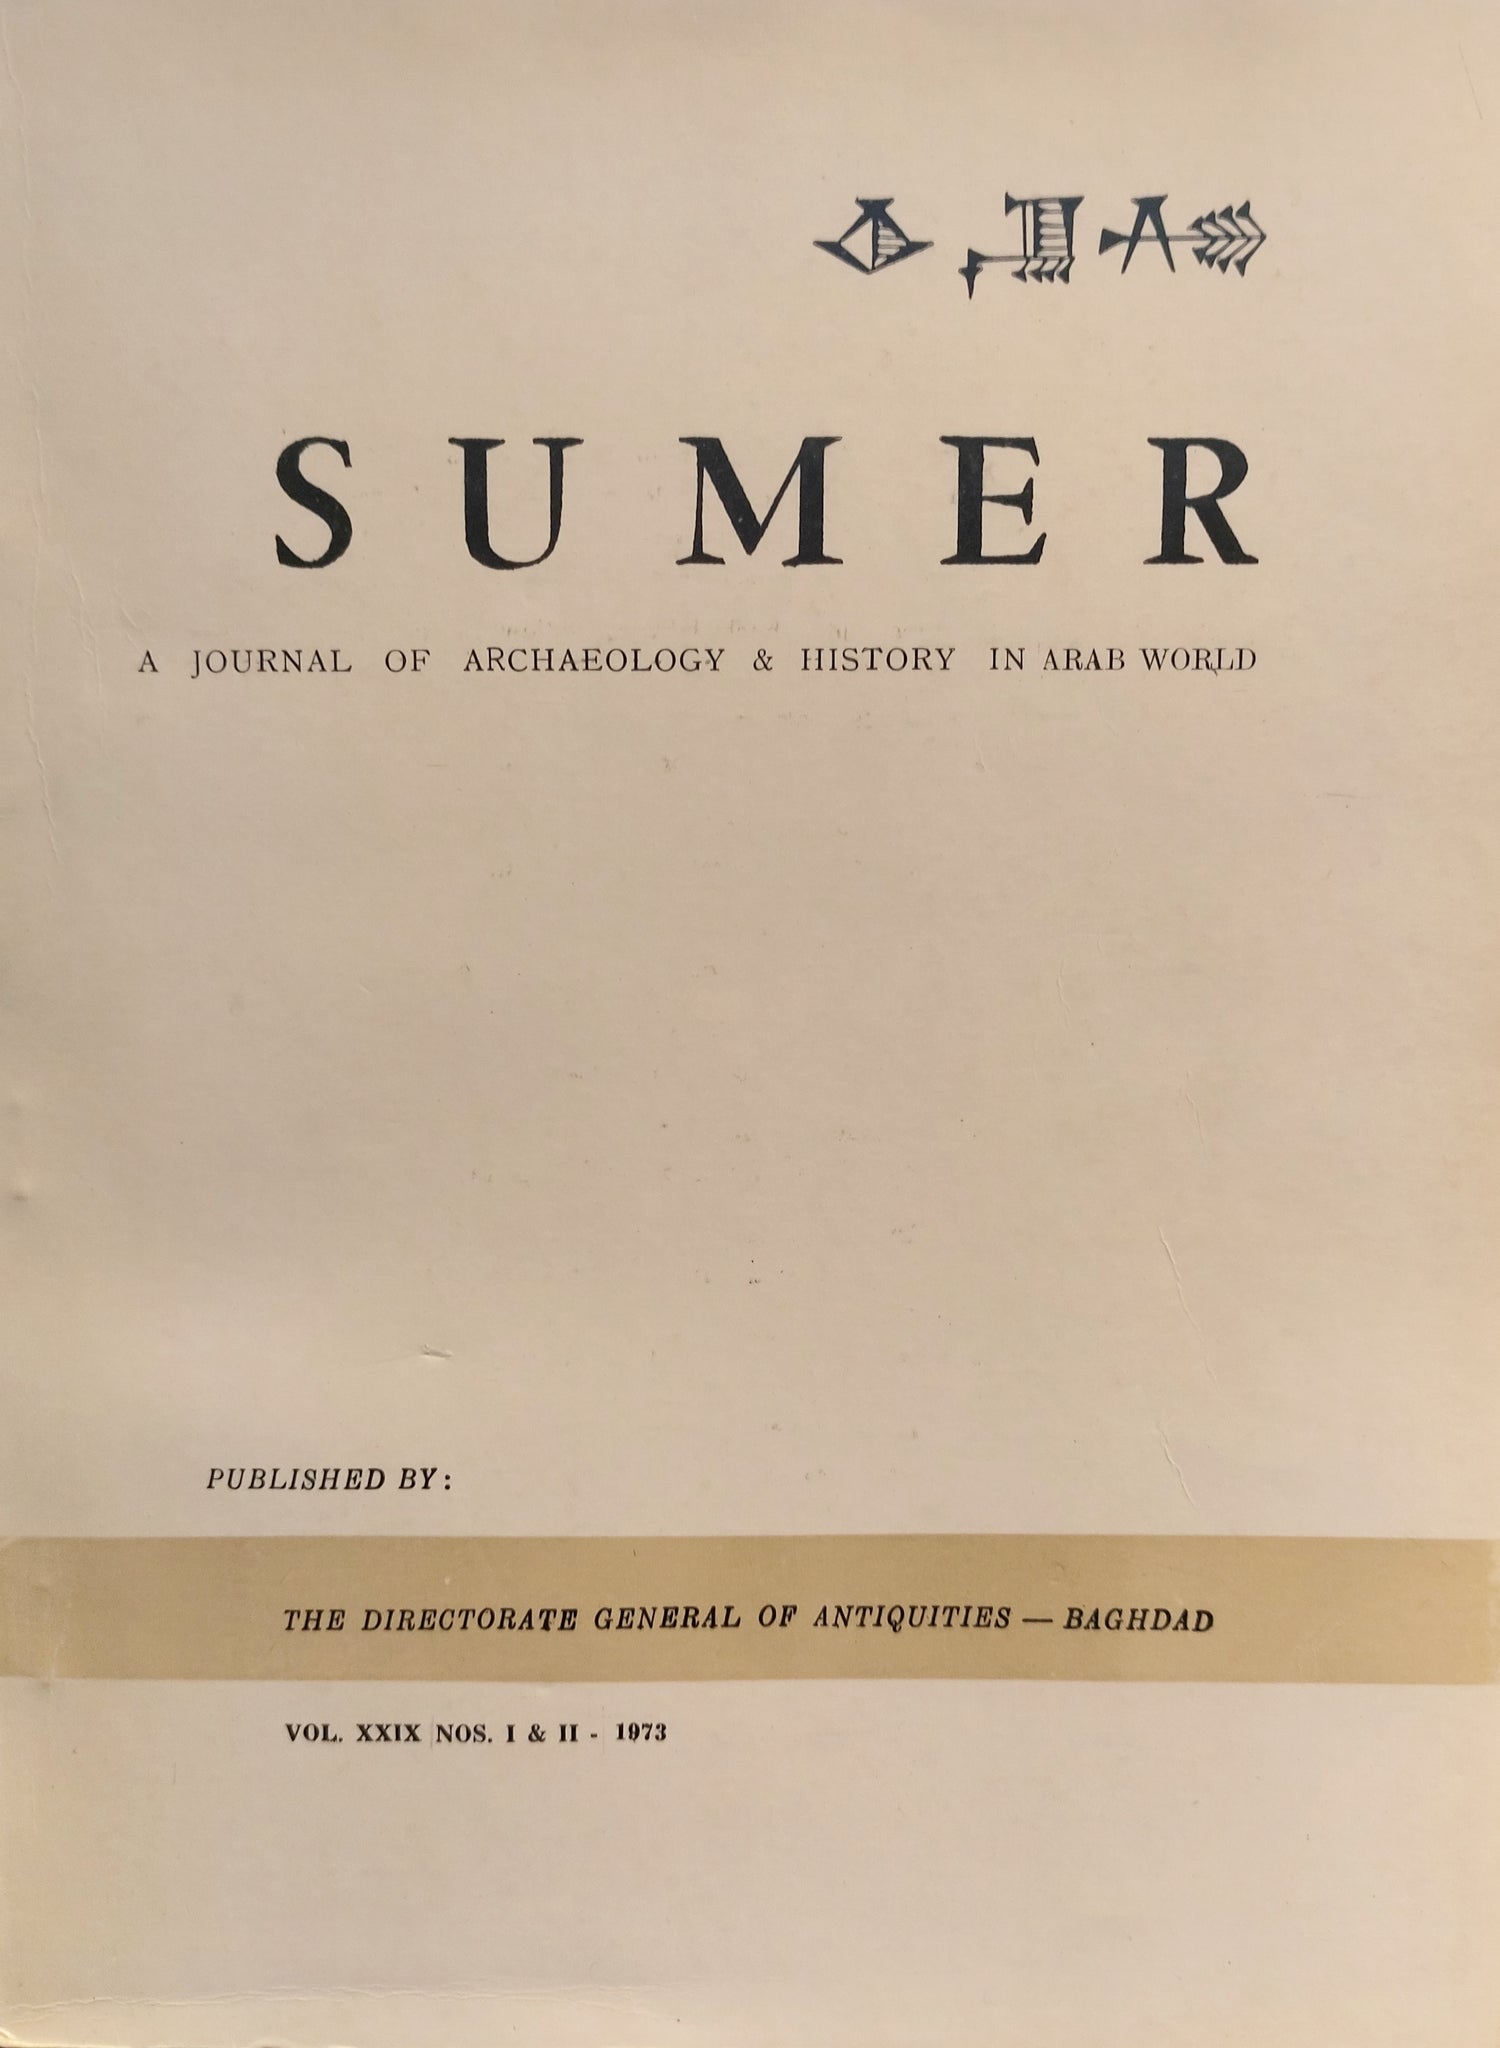 Sumer: A Journal of Archaeology and History in Arab World. Vol XXIX, N°1 & 2.